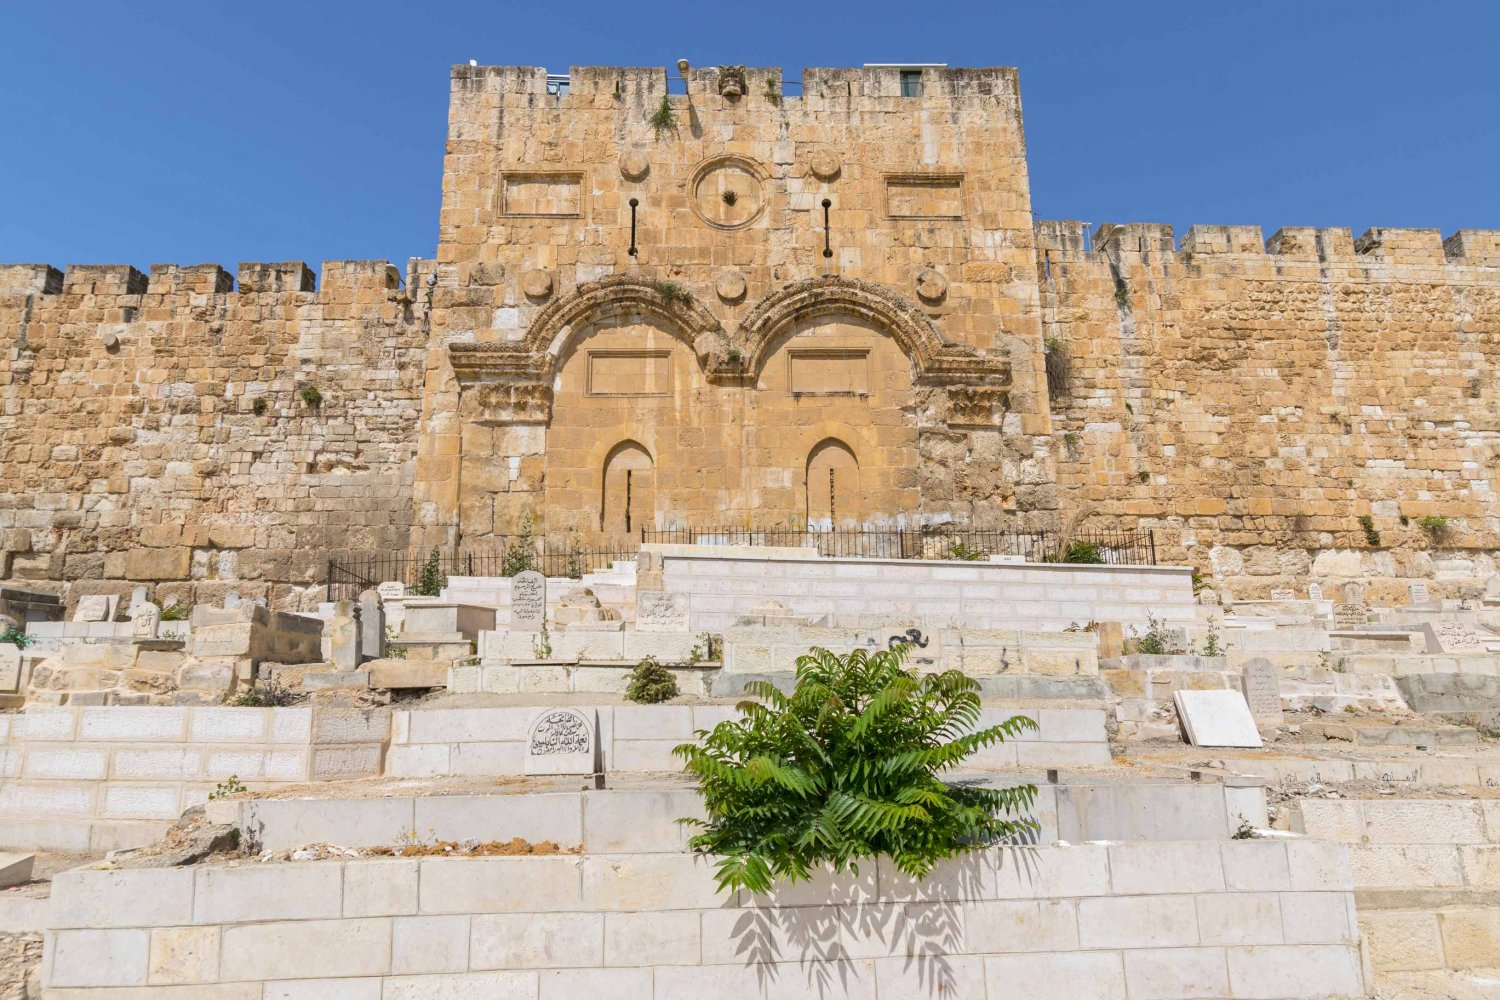 The Golden Gate or Bab al-Rahma, one of the gates to Jerusalem's Old City